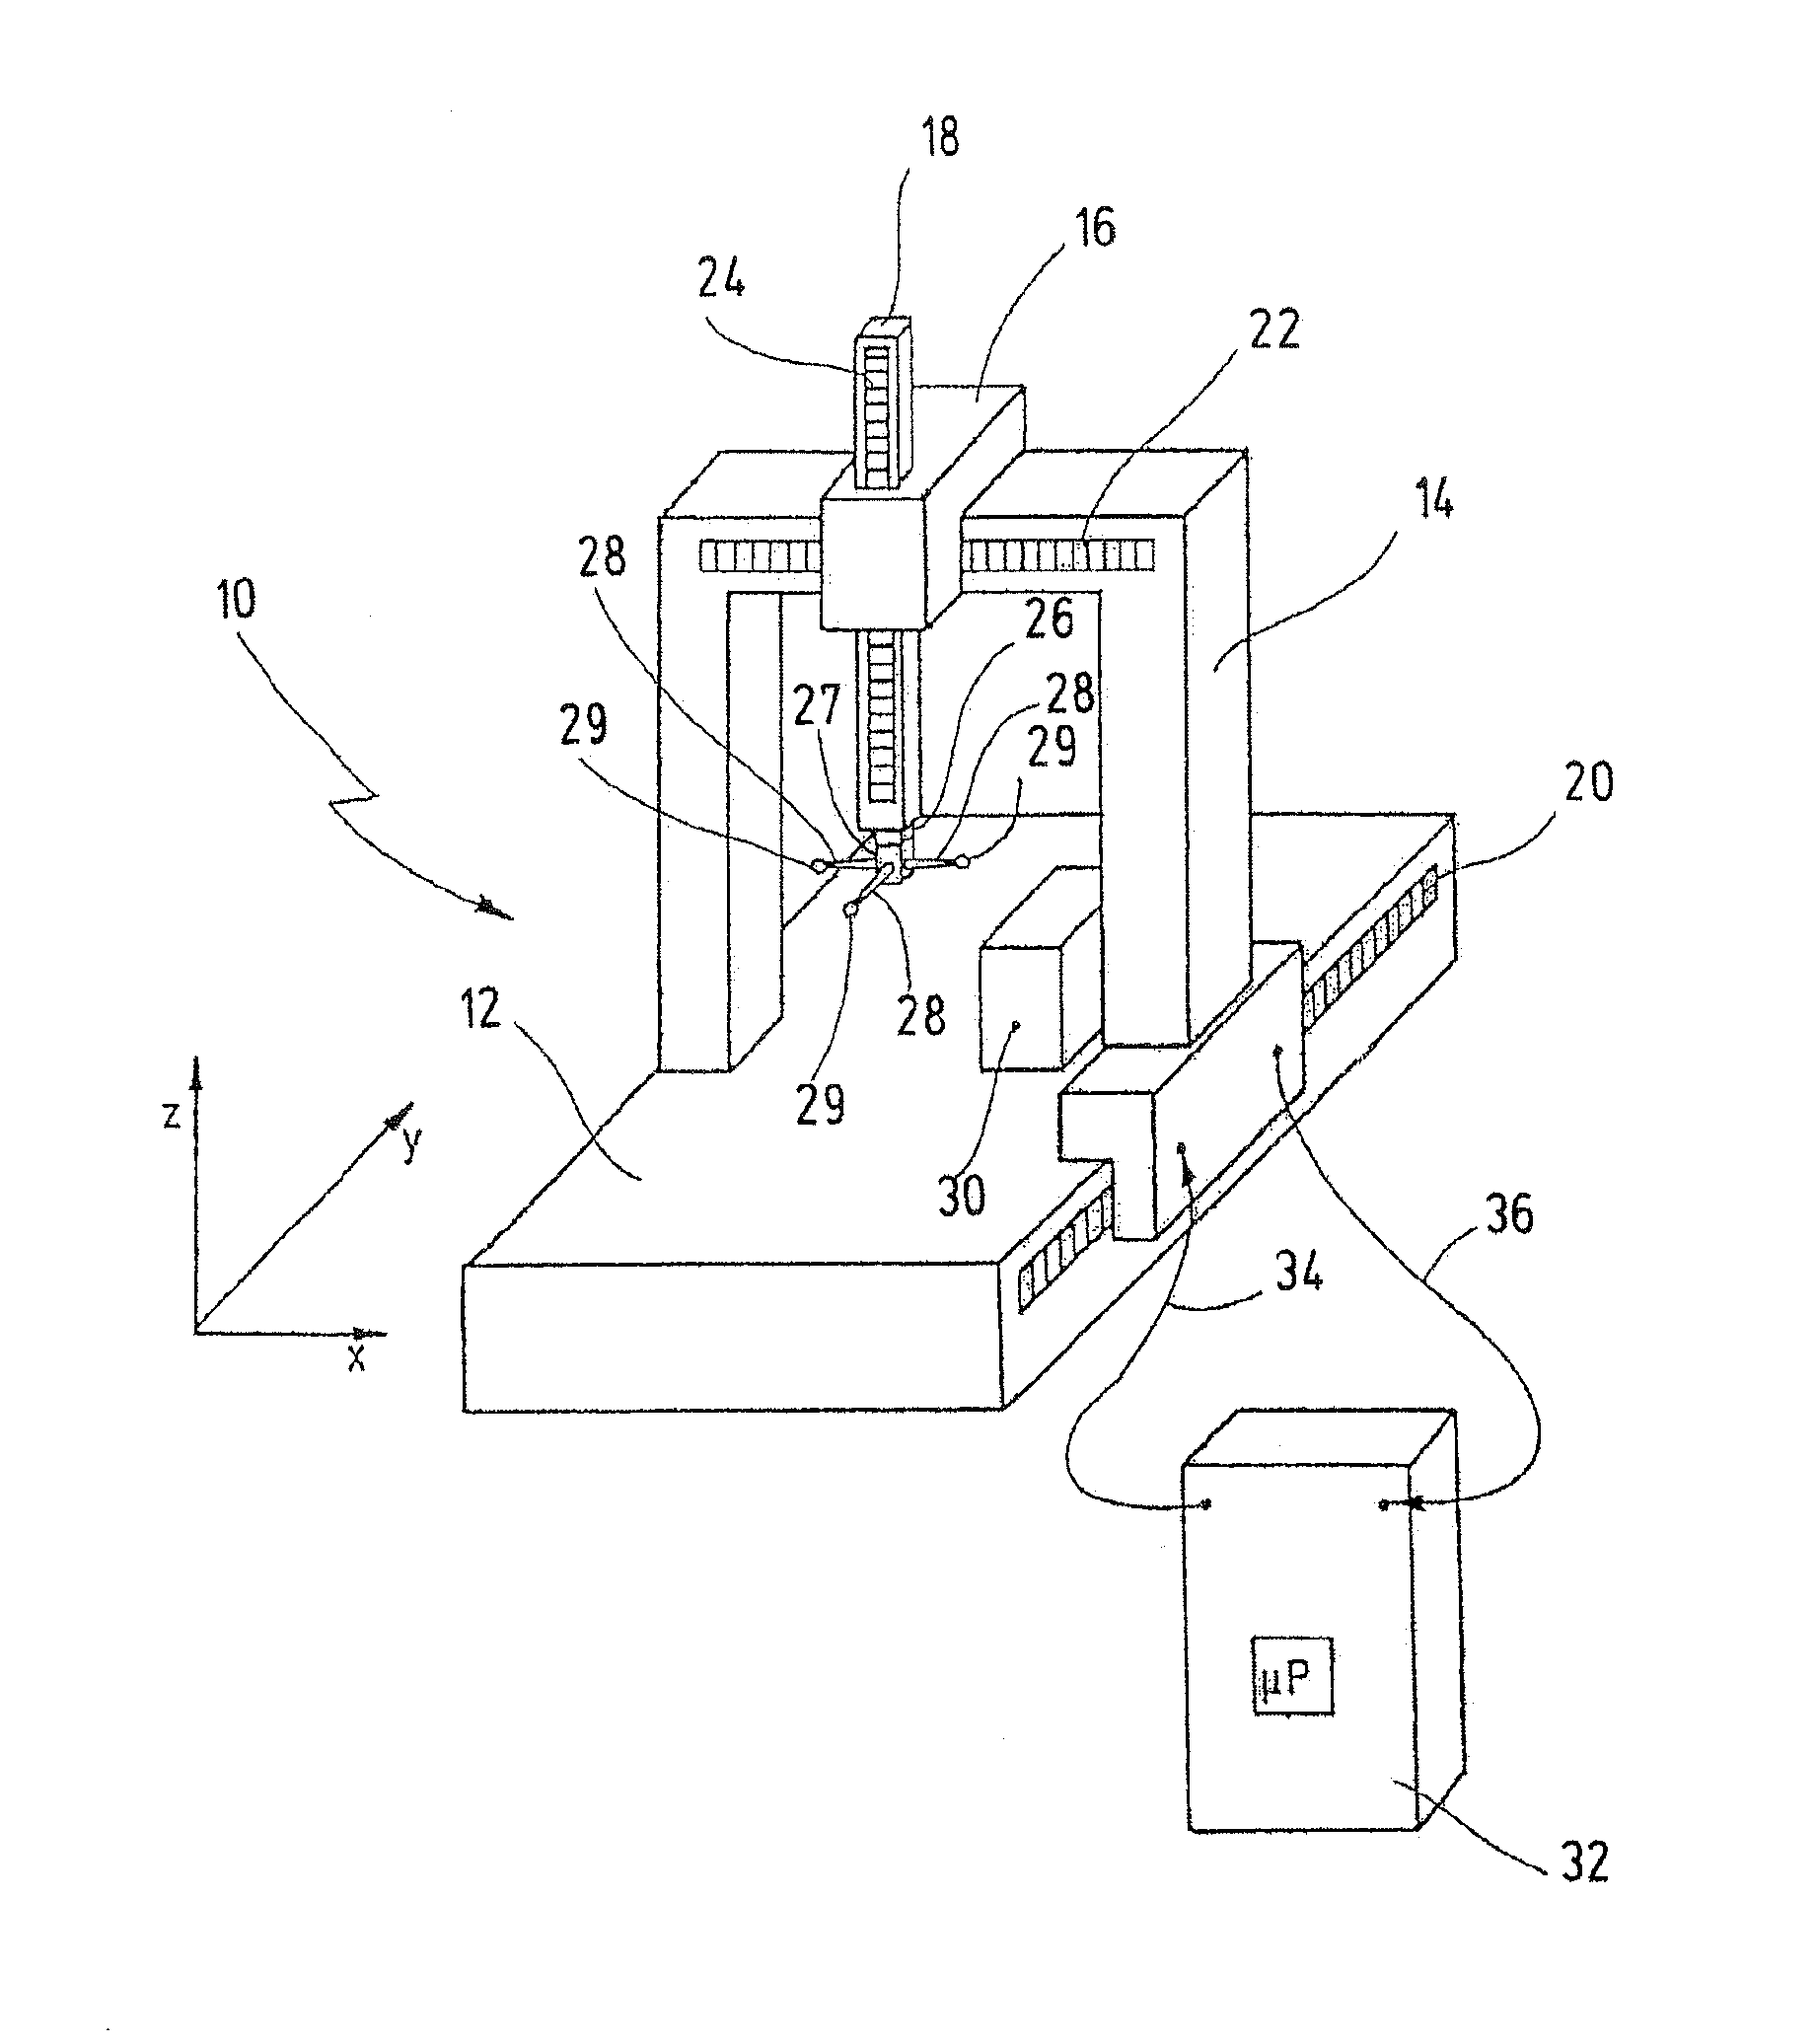 Measuring head for a coordinate measuring machine for determining spatial coordinates on a measurement object